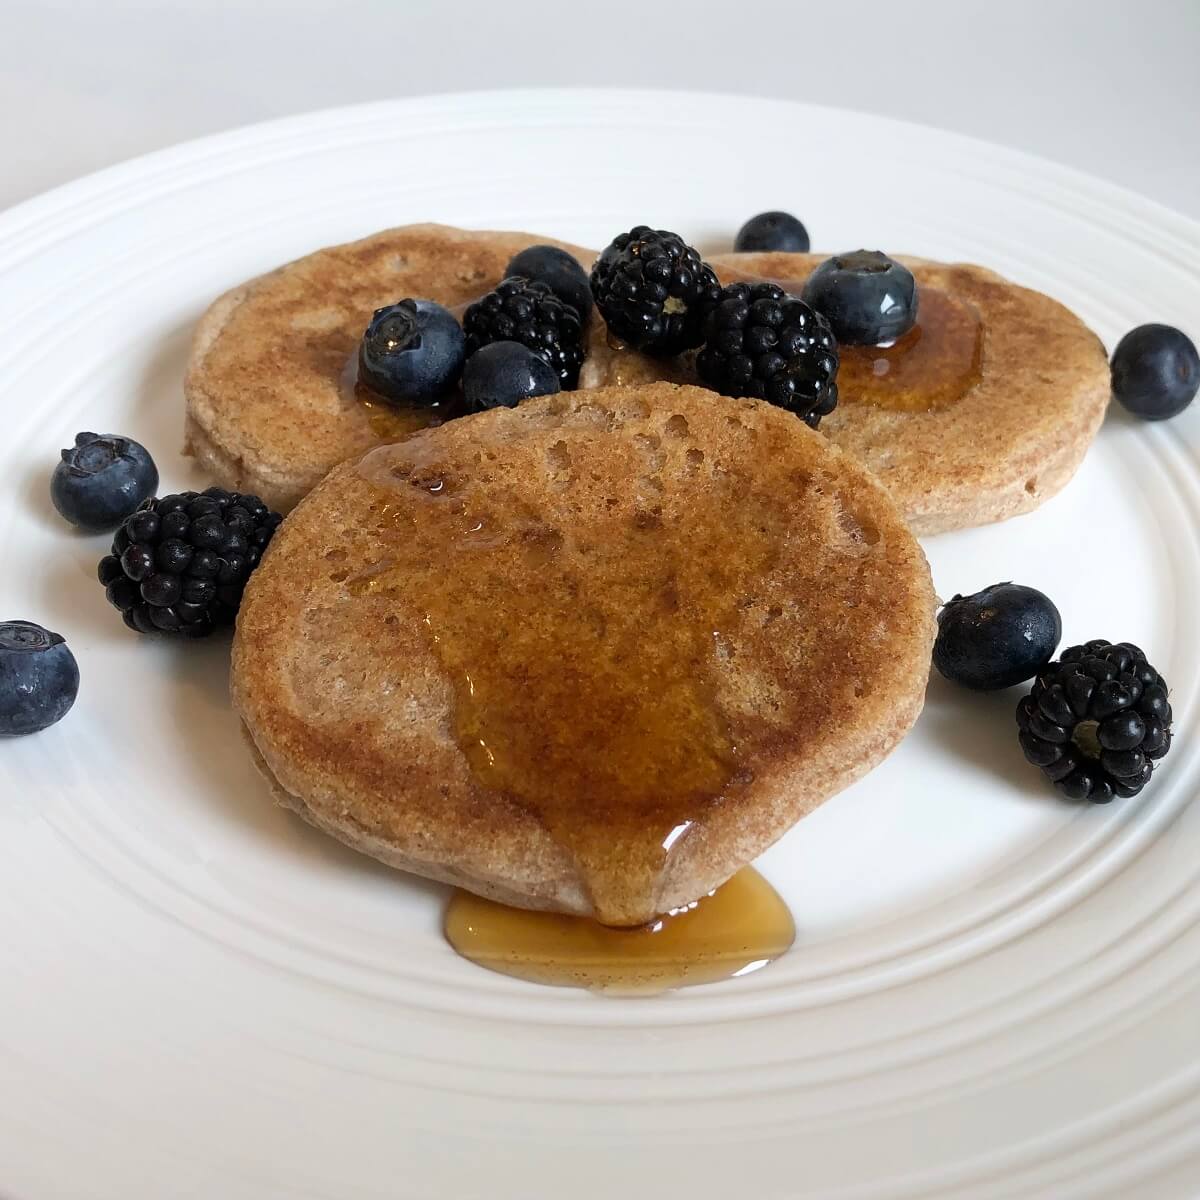 Three vegan whole wheat pancakes on a plate with fruit and syrup.